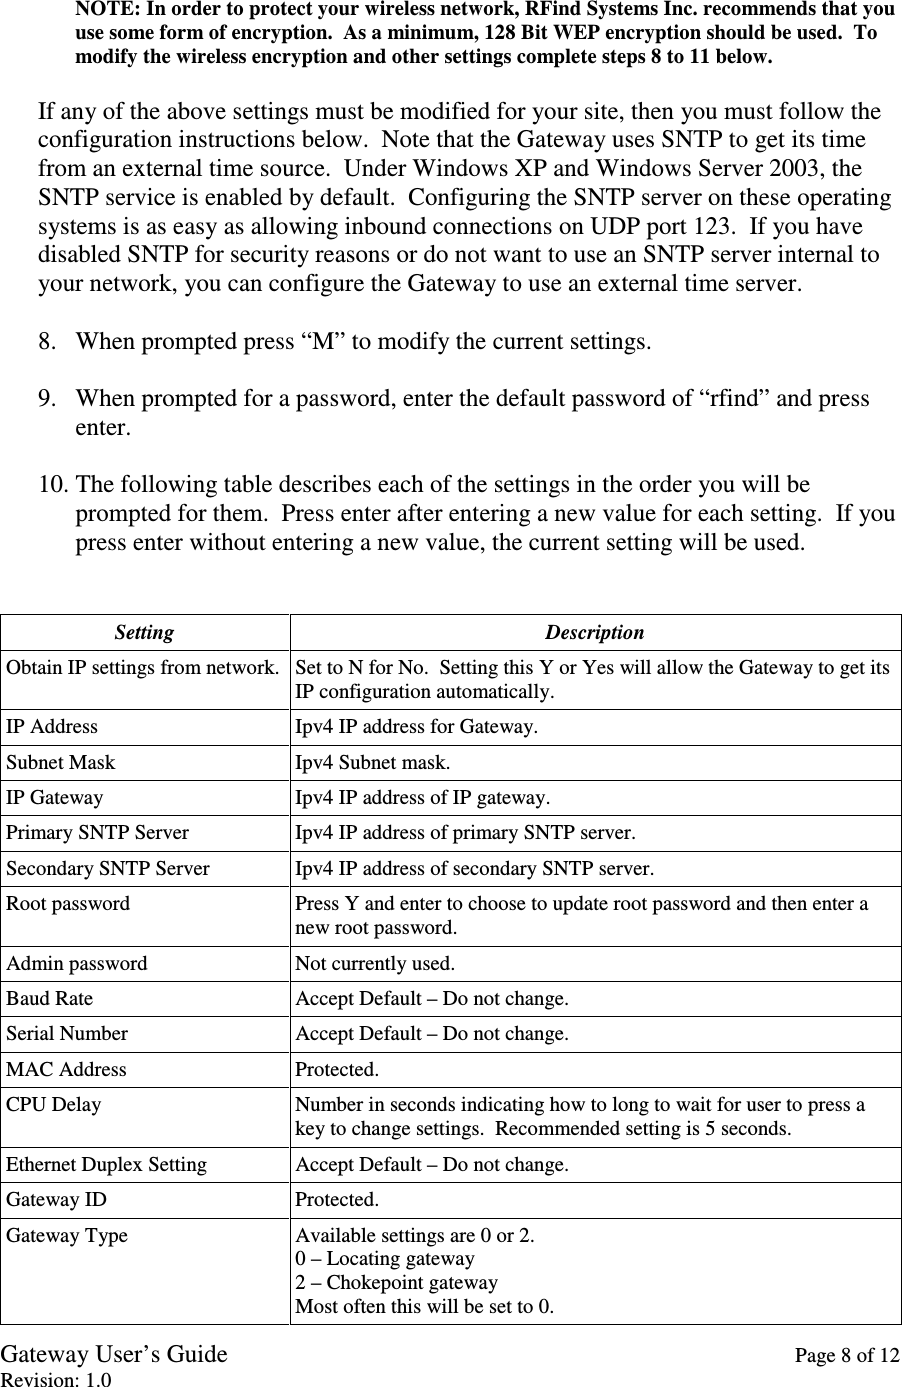 Gateway User’s Guide    Page 8 of 12 Revision: 1.0  NOTE: In order to protect your wireless network, RFind Systems Inc. recommends that you use some form of encryption.  As a minimum, 128 Bit WEP encryption should be used.  To modify the wireless encryption and other settings complete steps 8 to 11 below.  If any of the above settings must be modified for your site, then you must follow the configuration instructions below.  Note that the Gateway uses SNTP to get its time from an external time source.  Under Windows XP and Windows Server 2003, the SNTP service is enabled by default.  Configuring the SNTP server on these operating systems is as easy as allowing inbound connections on UDP port 123.  If you have disabled SNTP for security reasons or do not want to use an SNTP server internal to your network, you can configure the Gateway to use an external time server.  8. When prompted press “M” to modify the current settings.  9. When prompted for a password, enter the default password of “rfind” and press enter.  10. The following table describes each of the settings in the order you will be prompted for them.  Press enter after entering a new value for each setting.  If you press enter without entering a new value, the current setting will be used.   Setting  Description Obtain IP settings from network. Set to N for No.  Setting this Y or Yes will allow the Gateway to get its IP configuration automatically. IP Address  Ipv4 IP address for Gateway. Subnet Mask  Ipv4 Subnet mask. IP Gateway  Ipv4 IP address of IP gateway. Primary SNTP Server  Ipv4 IP address of primary SNTP server. Secondary SNTP Server  Ipv4 IP address of secondary SNTP server. Root password  Press Y and enter to choose to update root password and then enter a new root password. Admin password  Not currently used. Baud Rate  Accept Default – Do not change. Serial Number  Accept Default – Do not change. MAC Address  Protected. CPU Delay  Number in seconds indicating how to long to wait for user to press a key to change settings.  Recommended setting is 5 seconds. Ethernet Duplex Setting  Accept Default – Do not change. Gateway ID  Protected. Gateway Type  Available settings are 0 or 2. 0 – Locating gateway 2 – Chokepoint gateway Most often this will be set to 0. 